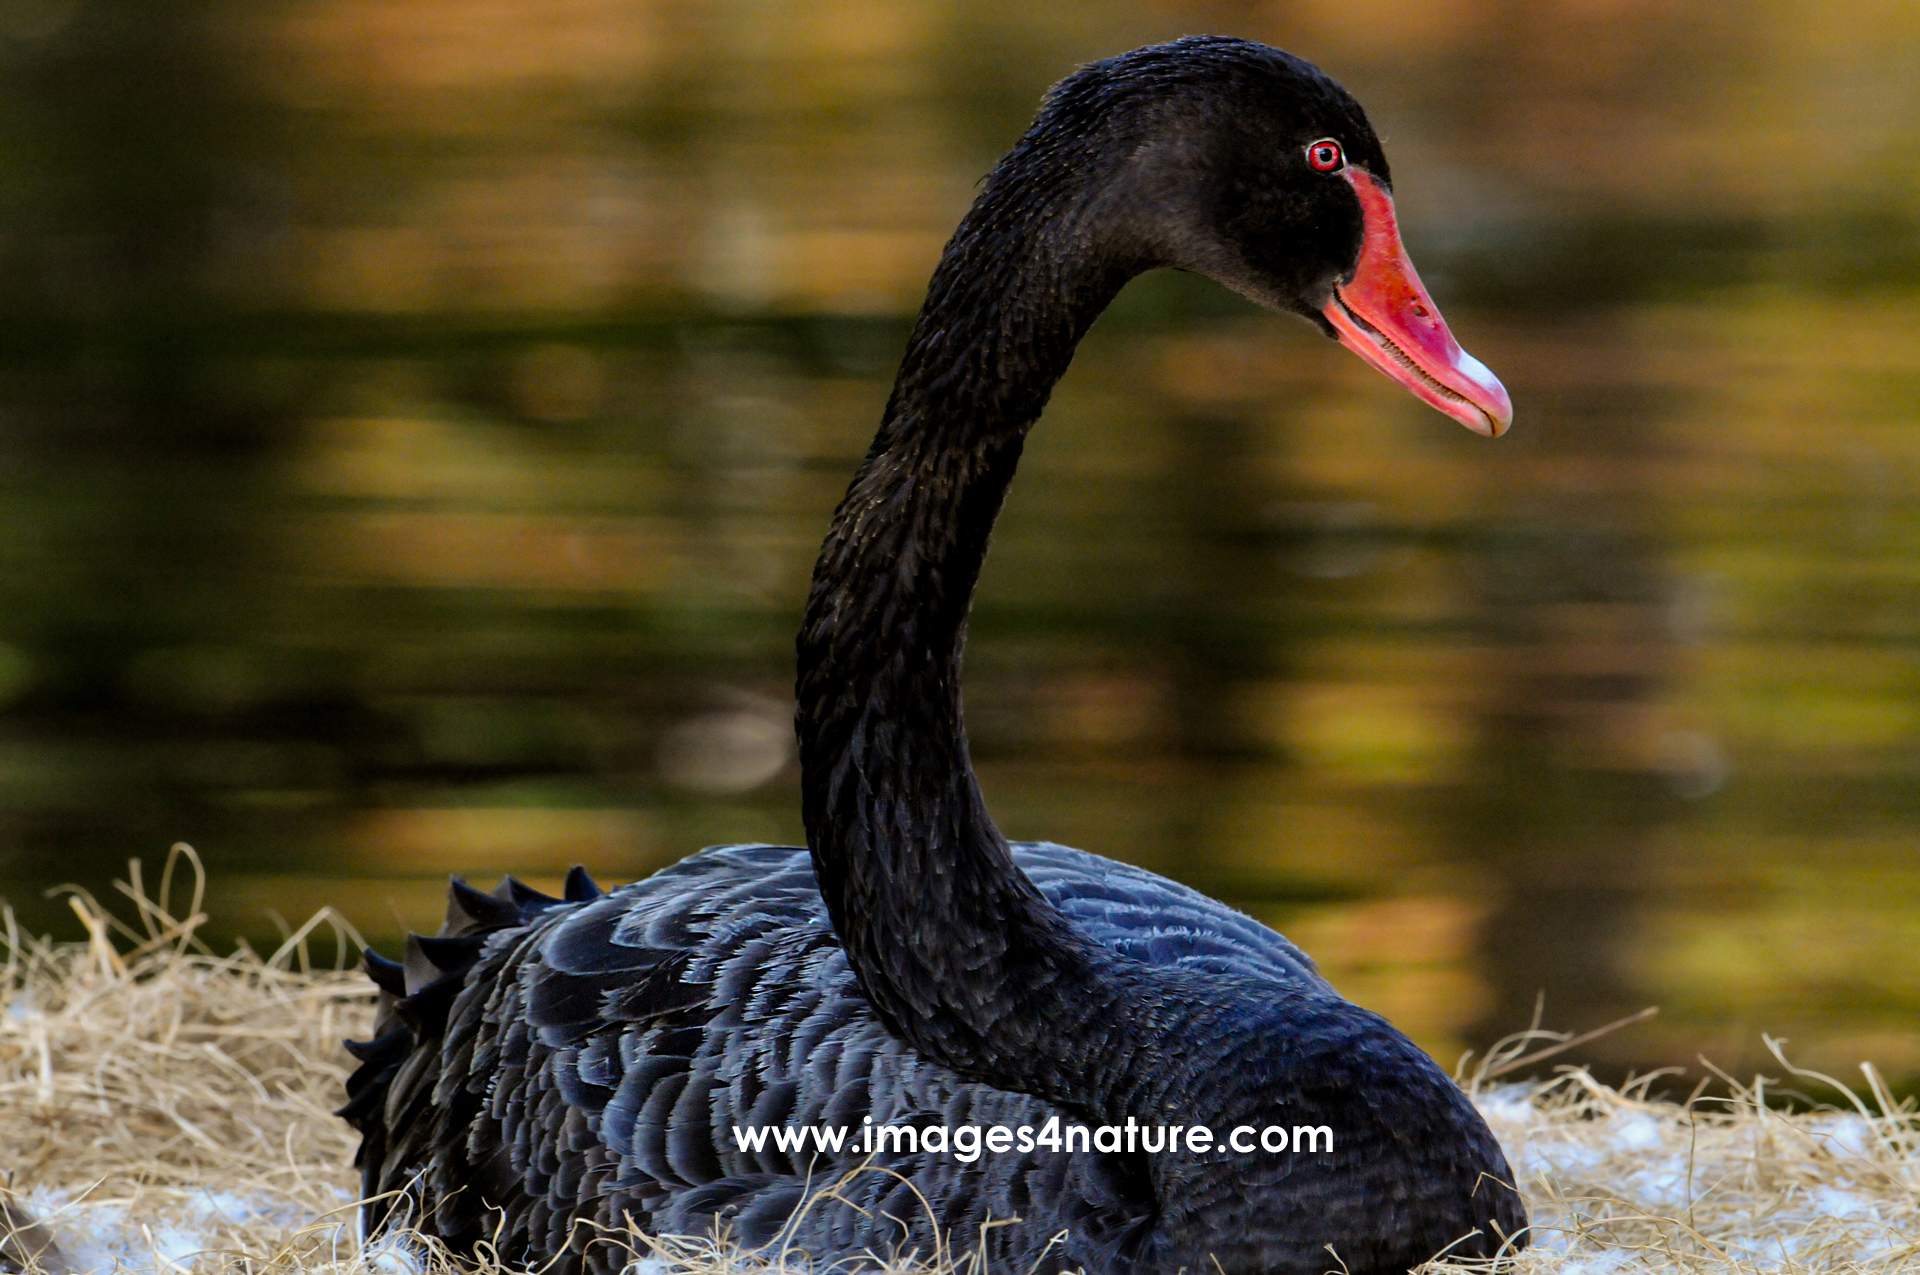 Side view of black swan with red beak resting in its nest